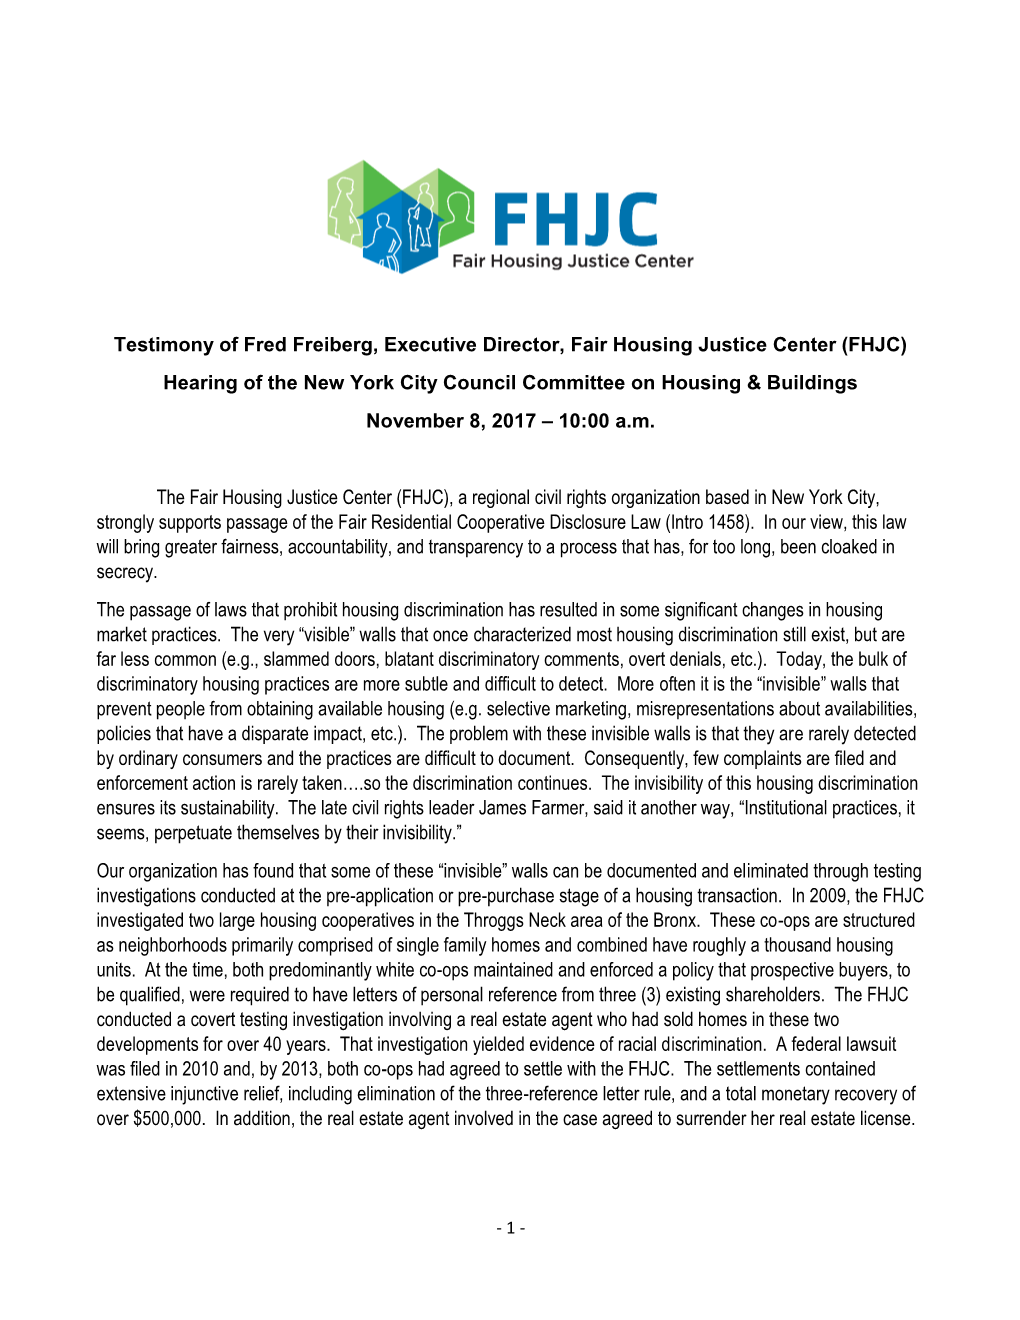 Testimony of Fred Freiberg, Executive Director, Fair Housing Justice Center (FHJC) Hearing of the New York City Council Committe